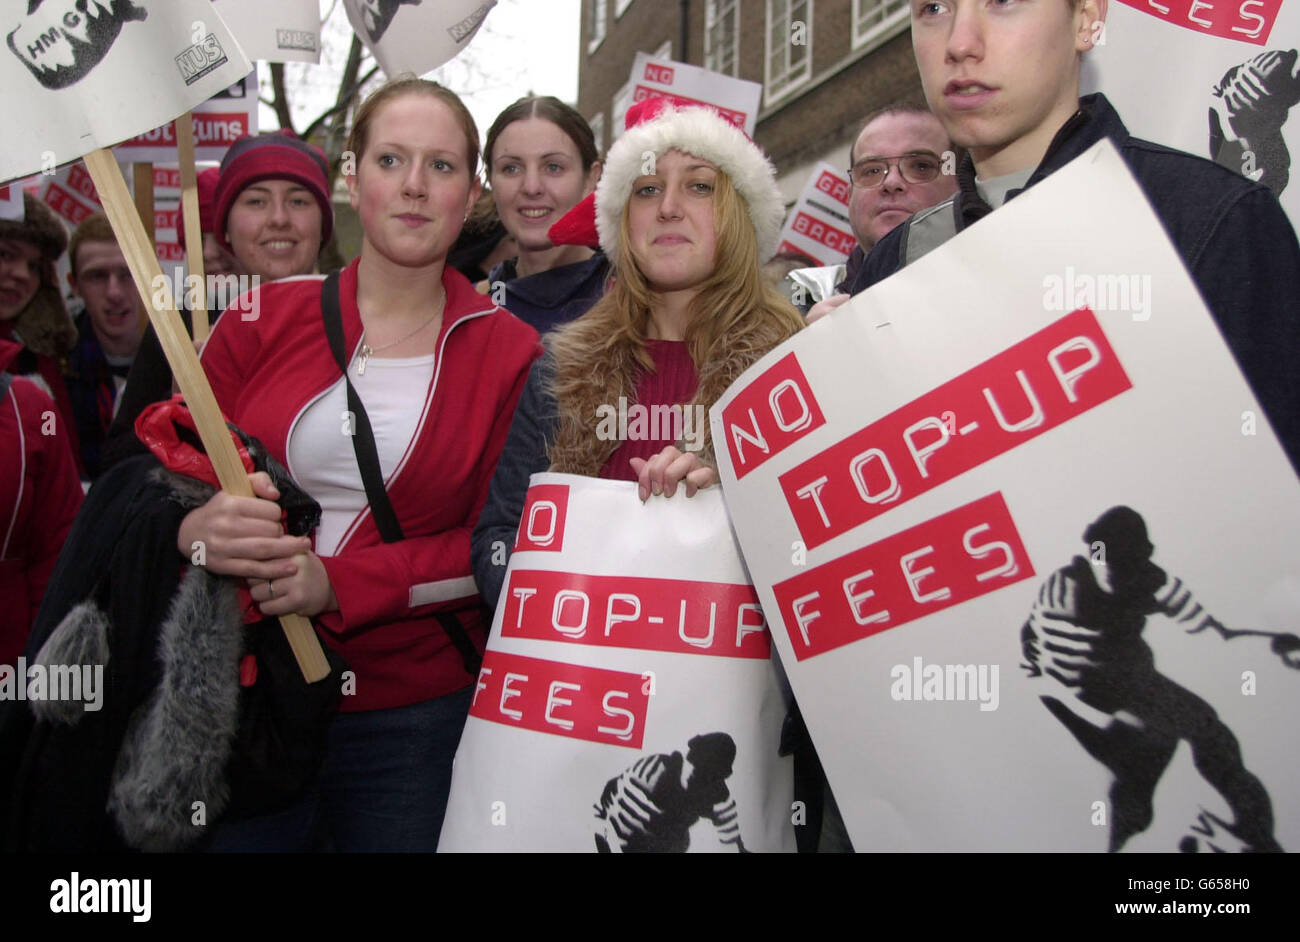 Charlotte Briggs (centre), Sarah Carty (centre left) and Gordon Ashenhurst (right), all students from Stirling University, protests against top-up fees outside the University of London Student Union. 24/01/04 Cambridge University students set off Saturday 24 January, 2004, on a 60-mile protest march to London to highlight their opposition to the Government's plans to introduce university top-up fees. The 12 students aim to arrive in London in time to join a mass demonstration held by the National Union of Students to coincide with a crucial debate in the House of Commons, London on Tuesday 27 Stock Photo